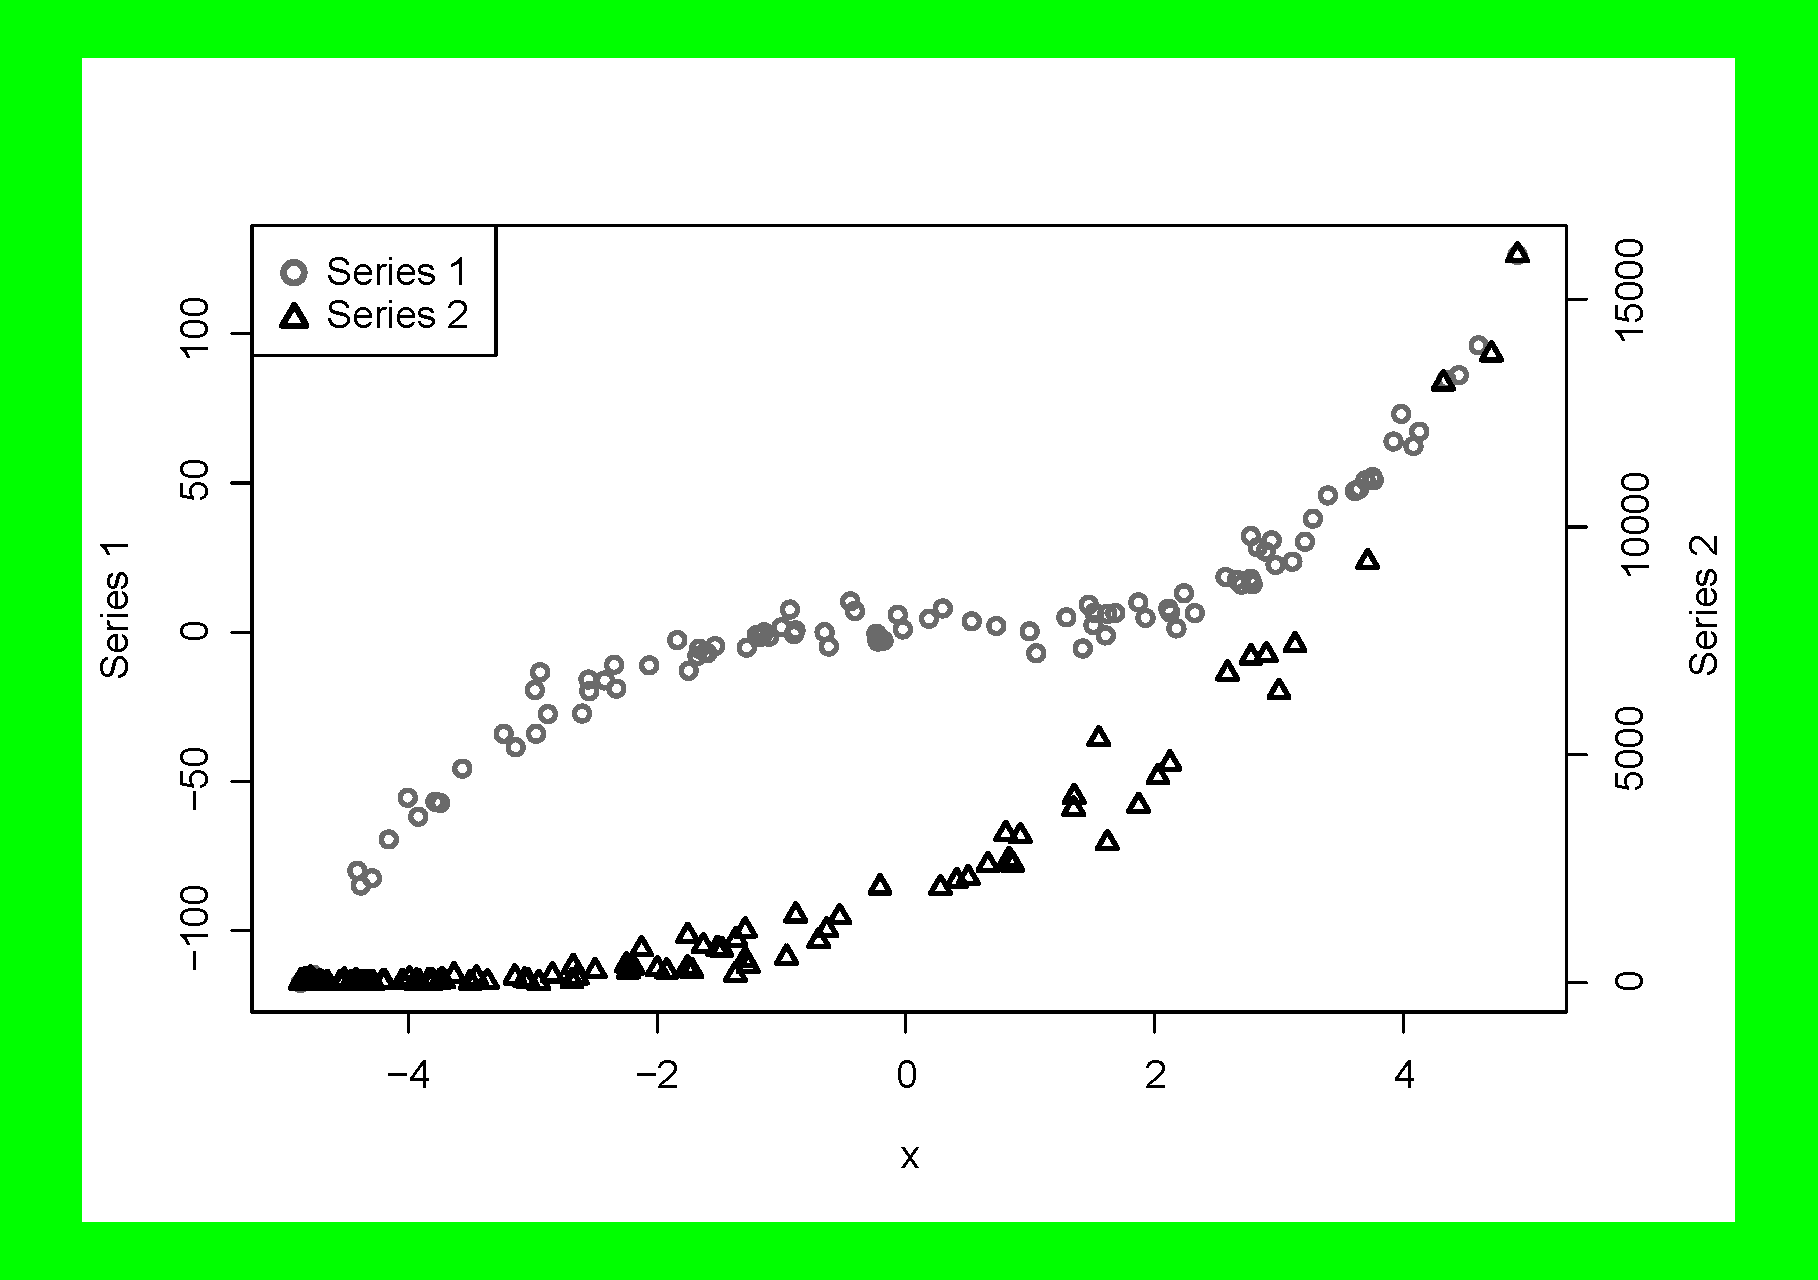 Example. Scatter plot, data series with different symbols